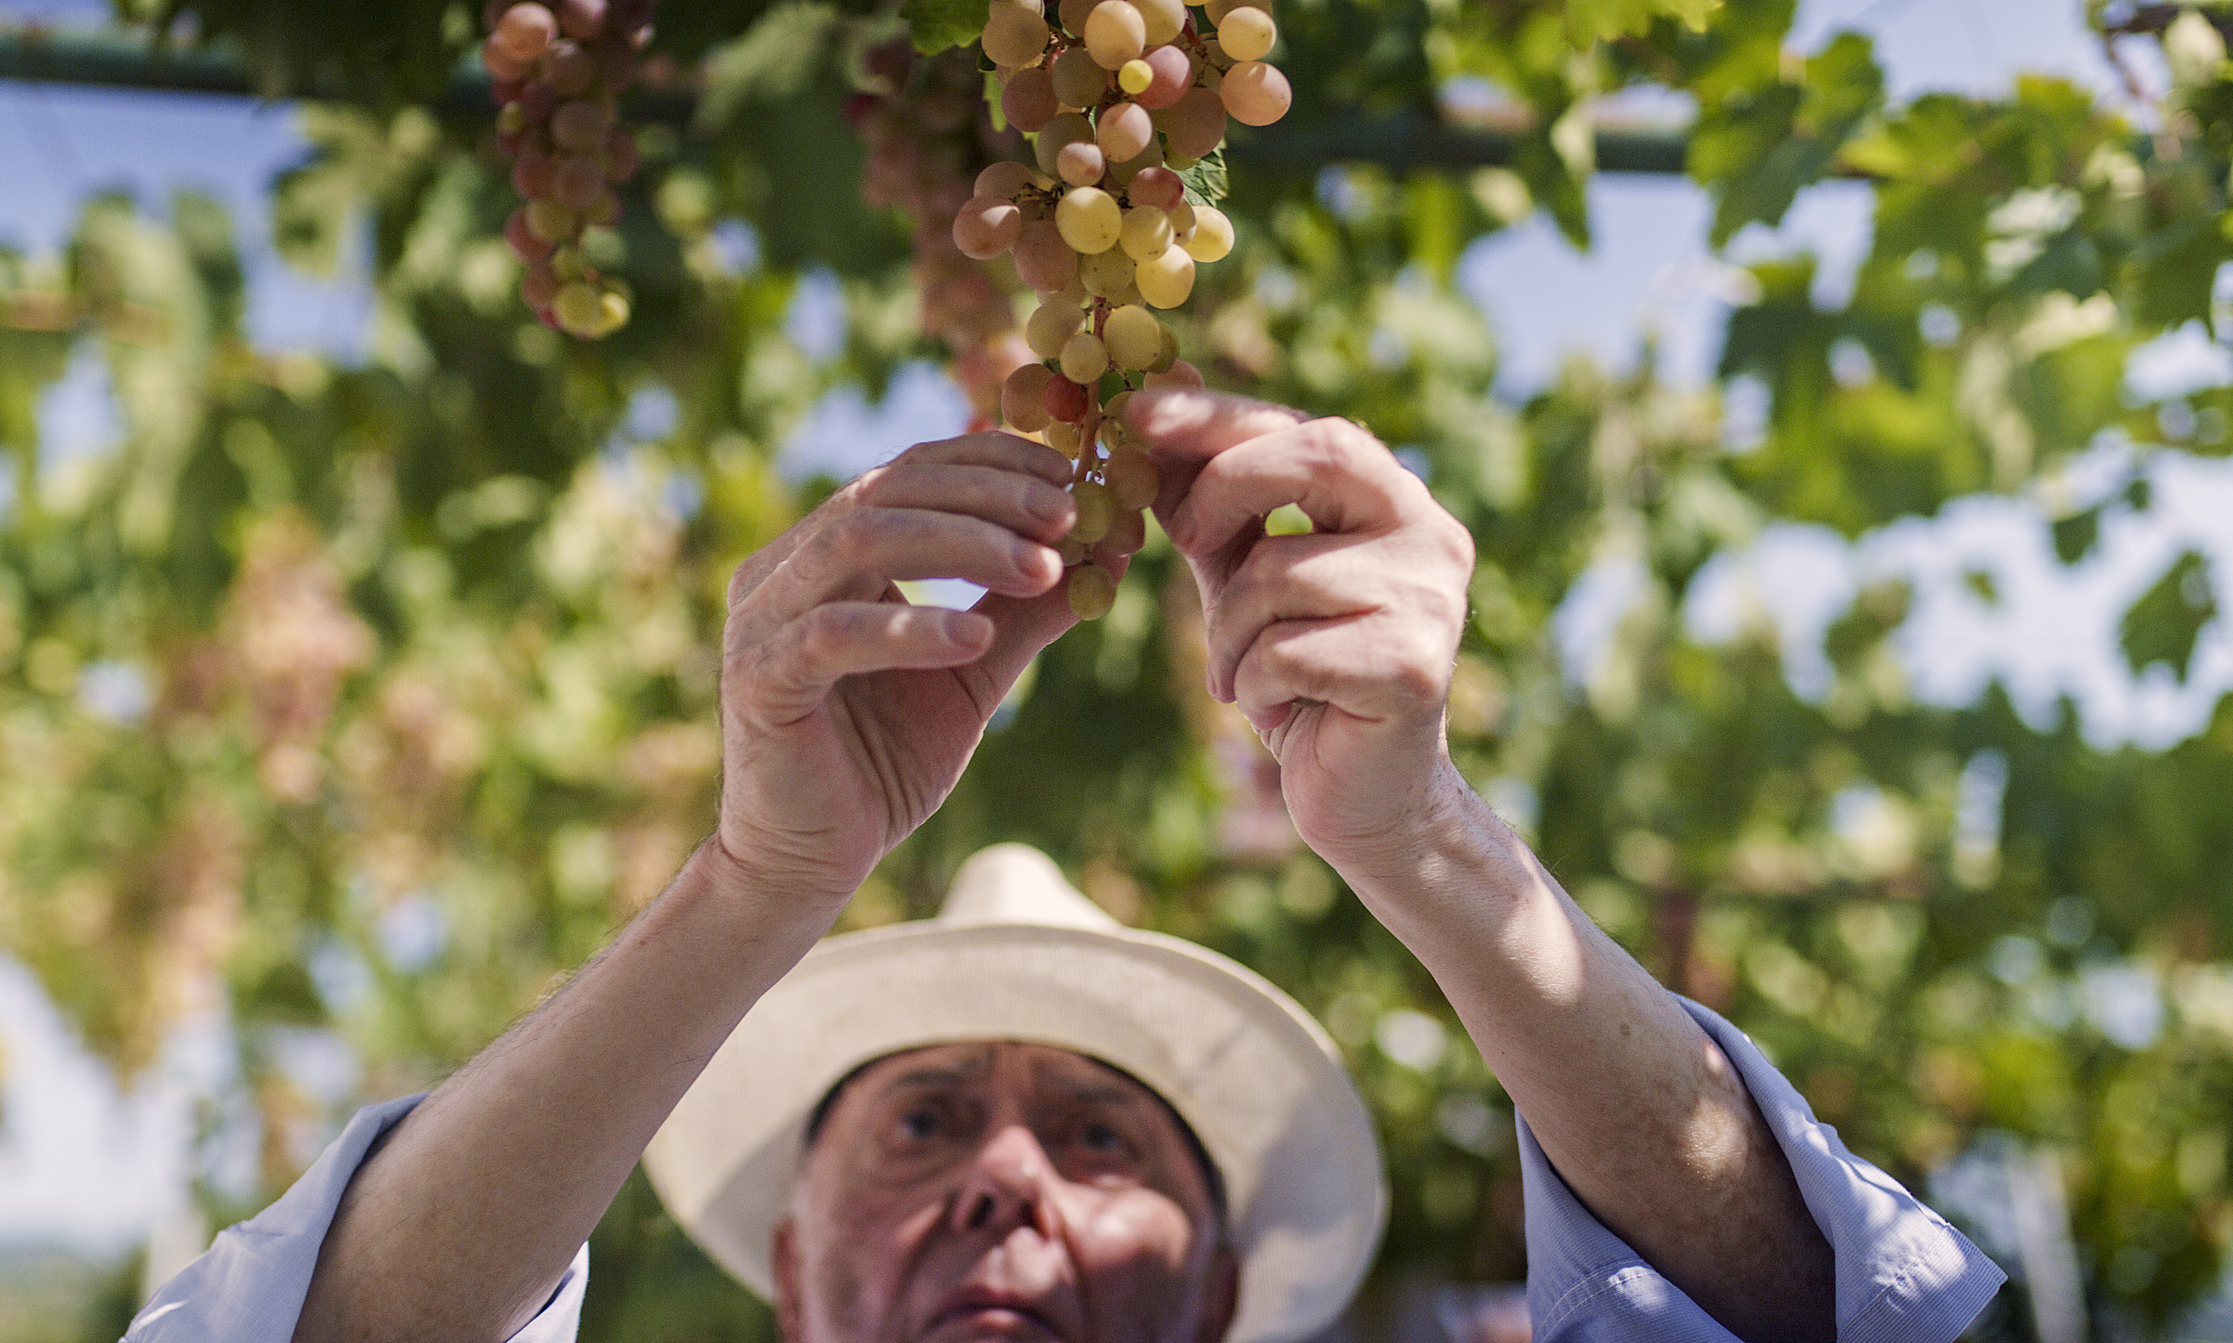 An older man in a sunhat picks a bunch of grapes from a vine. The background is filled with leafy grapevines